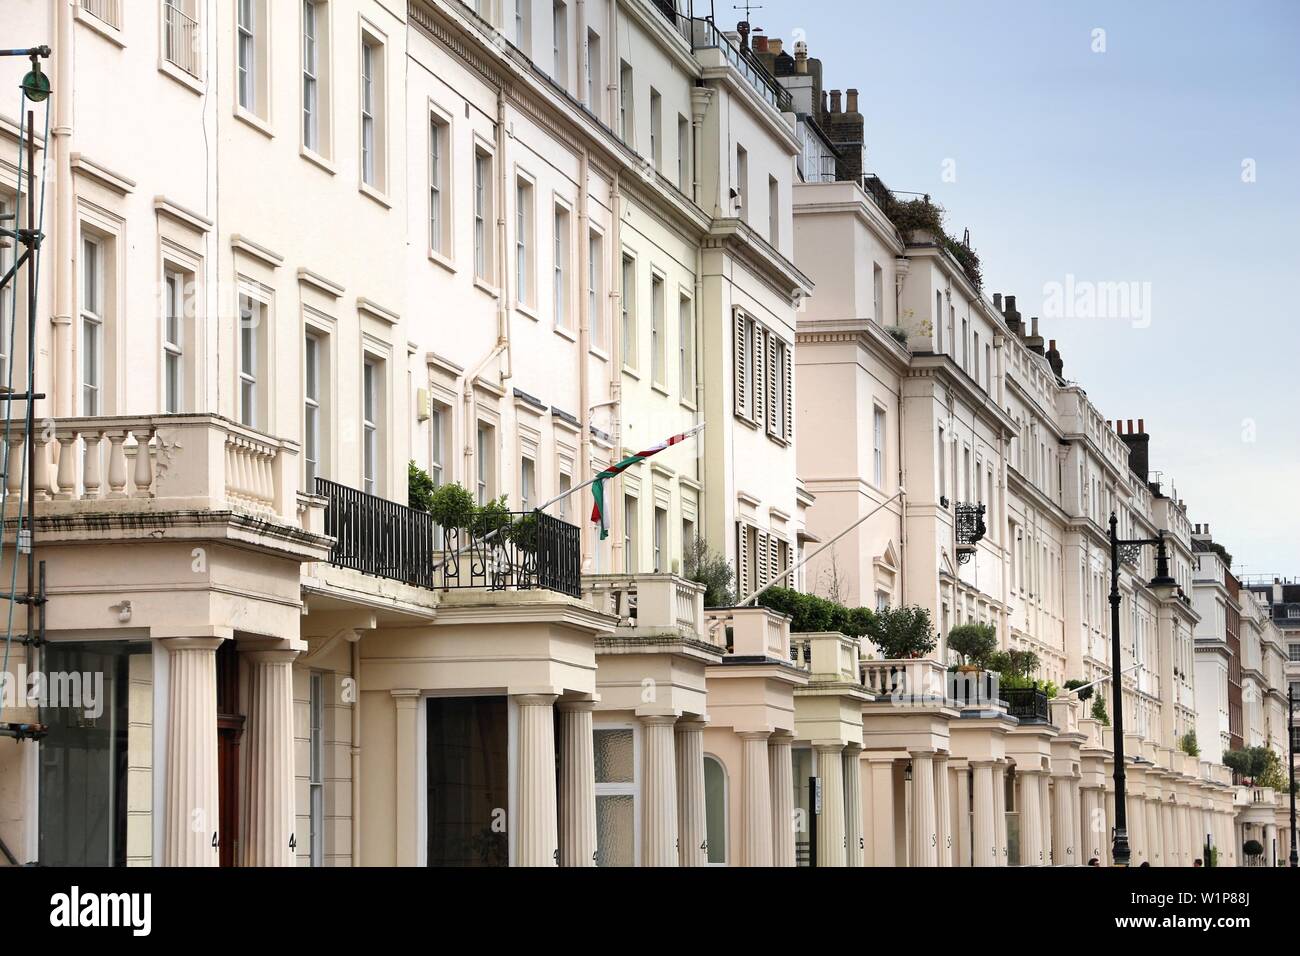 Belgravia in West London, UK. Affluent neighborhood in the City of Westminster and the Royal Borough of Kensington and Chelsea. Stock Photo